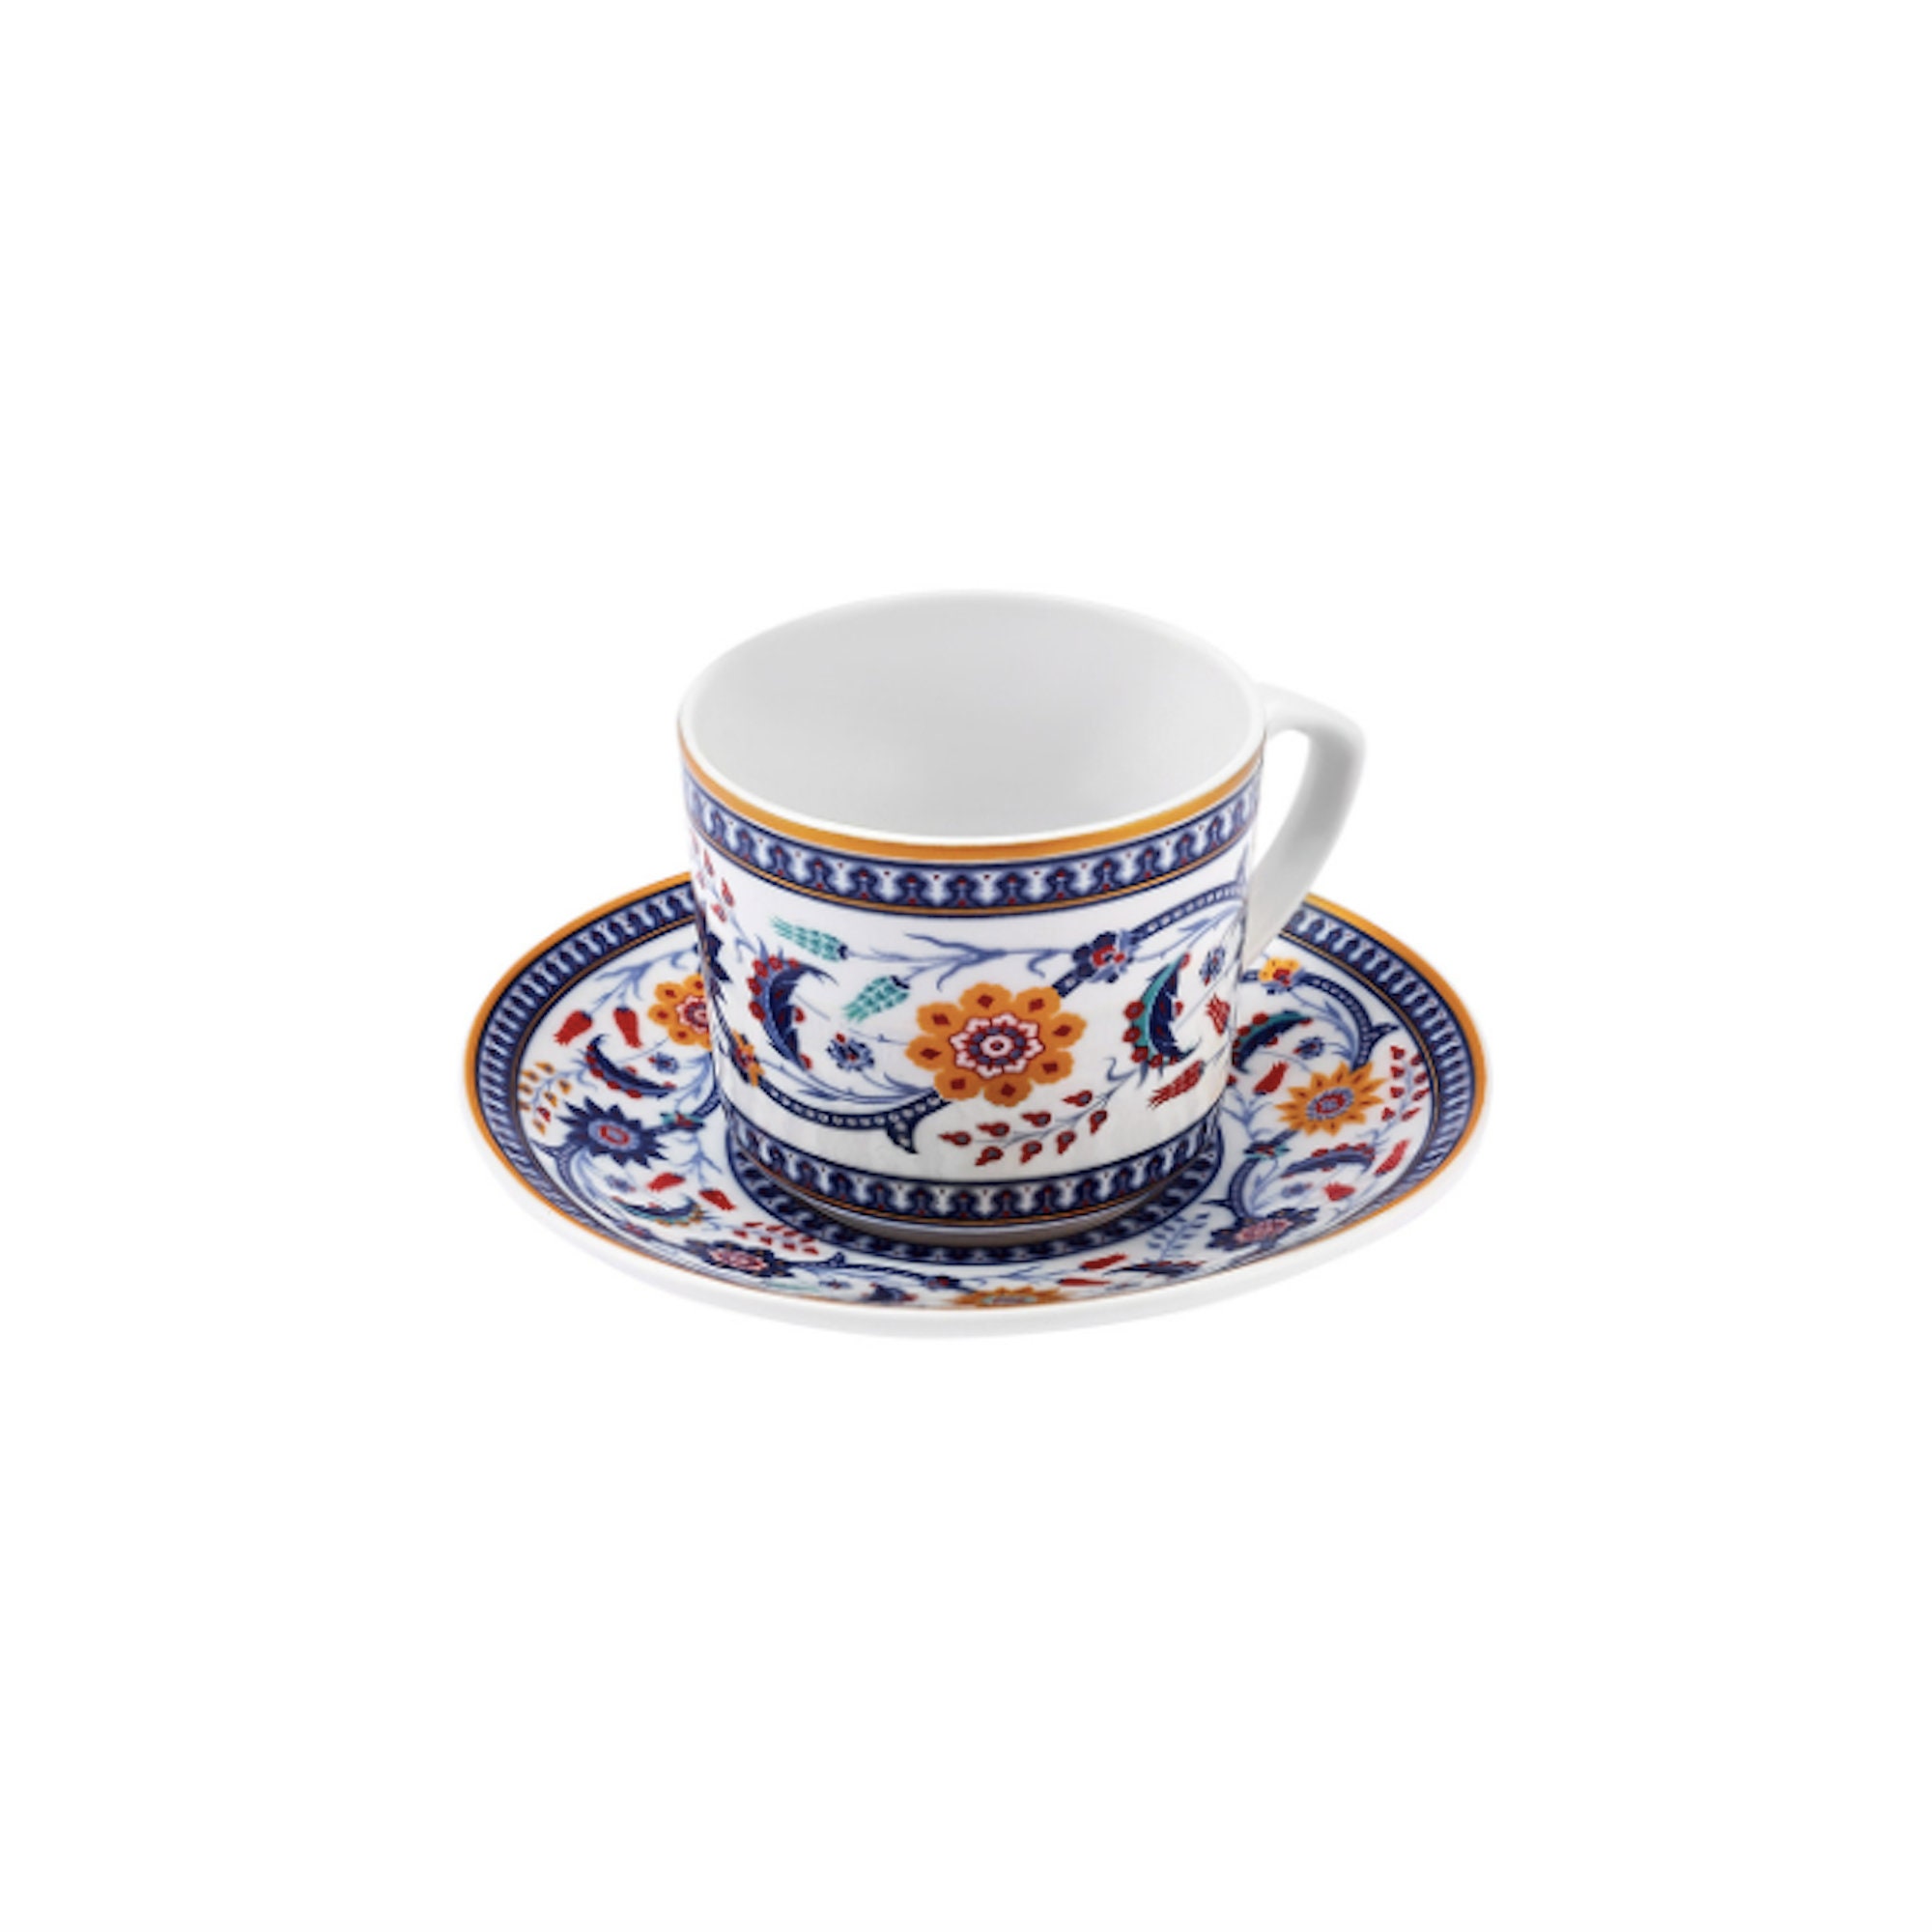 LUKA Porcelain Espresso Cup with Saucer and Metal Stand, 6 Ounce Stackable  Ceramic Demitasse Espress…See more LUKA Porcelain Espresso Cup with Saucer